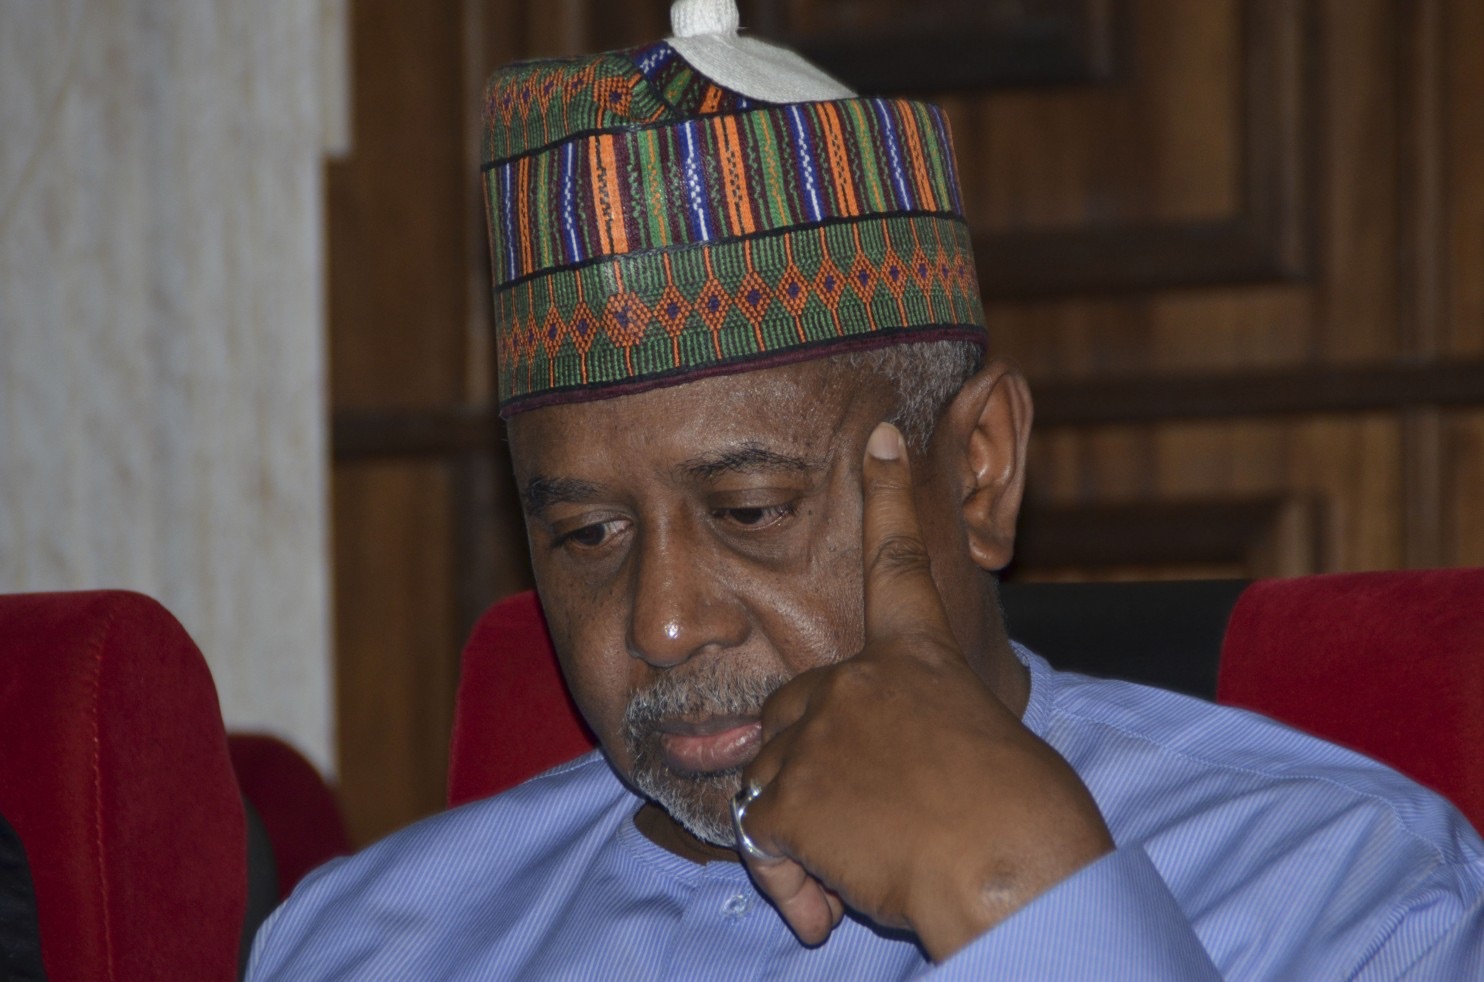 Dasuki to Buhari: I have never been invited to appear before any panel